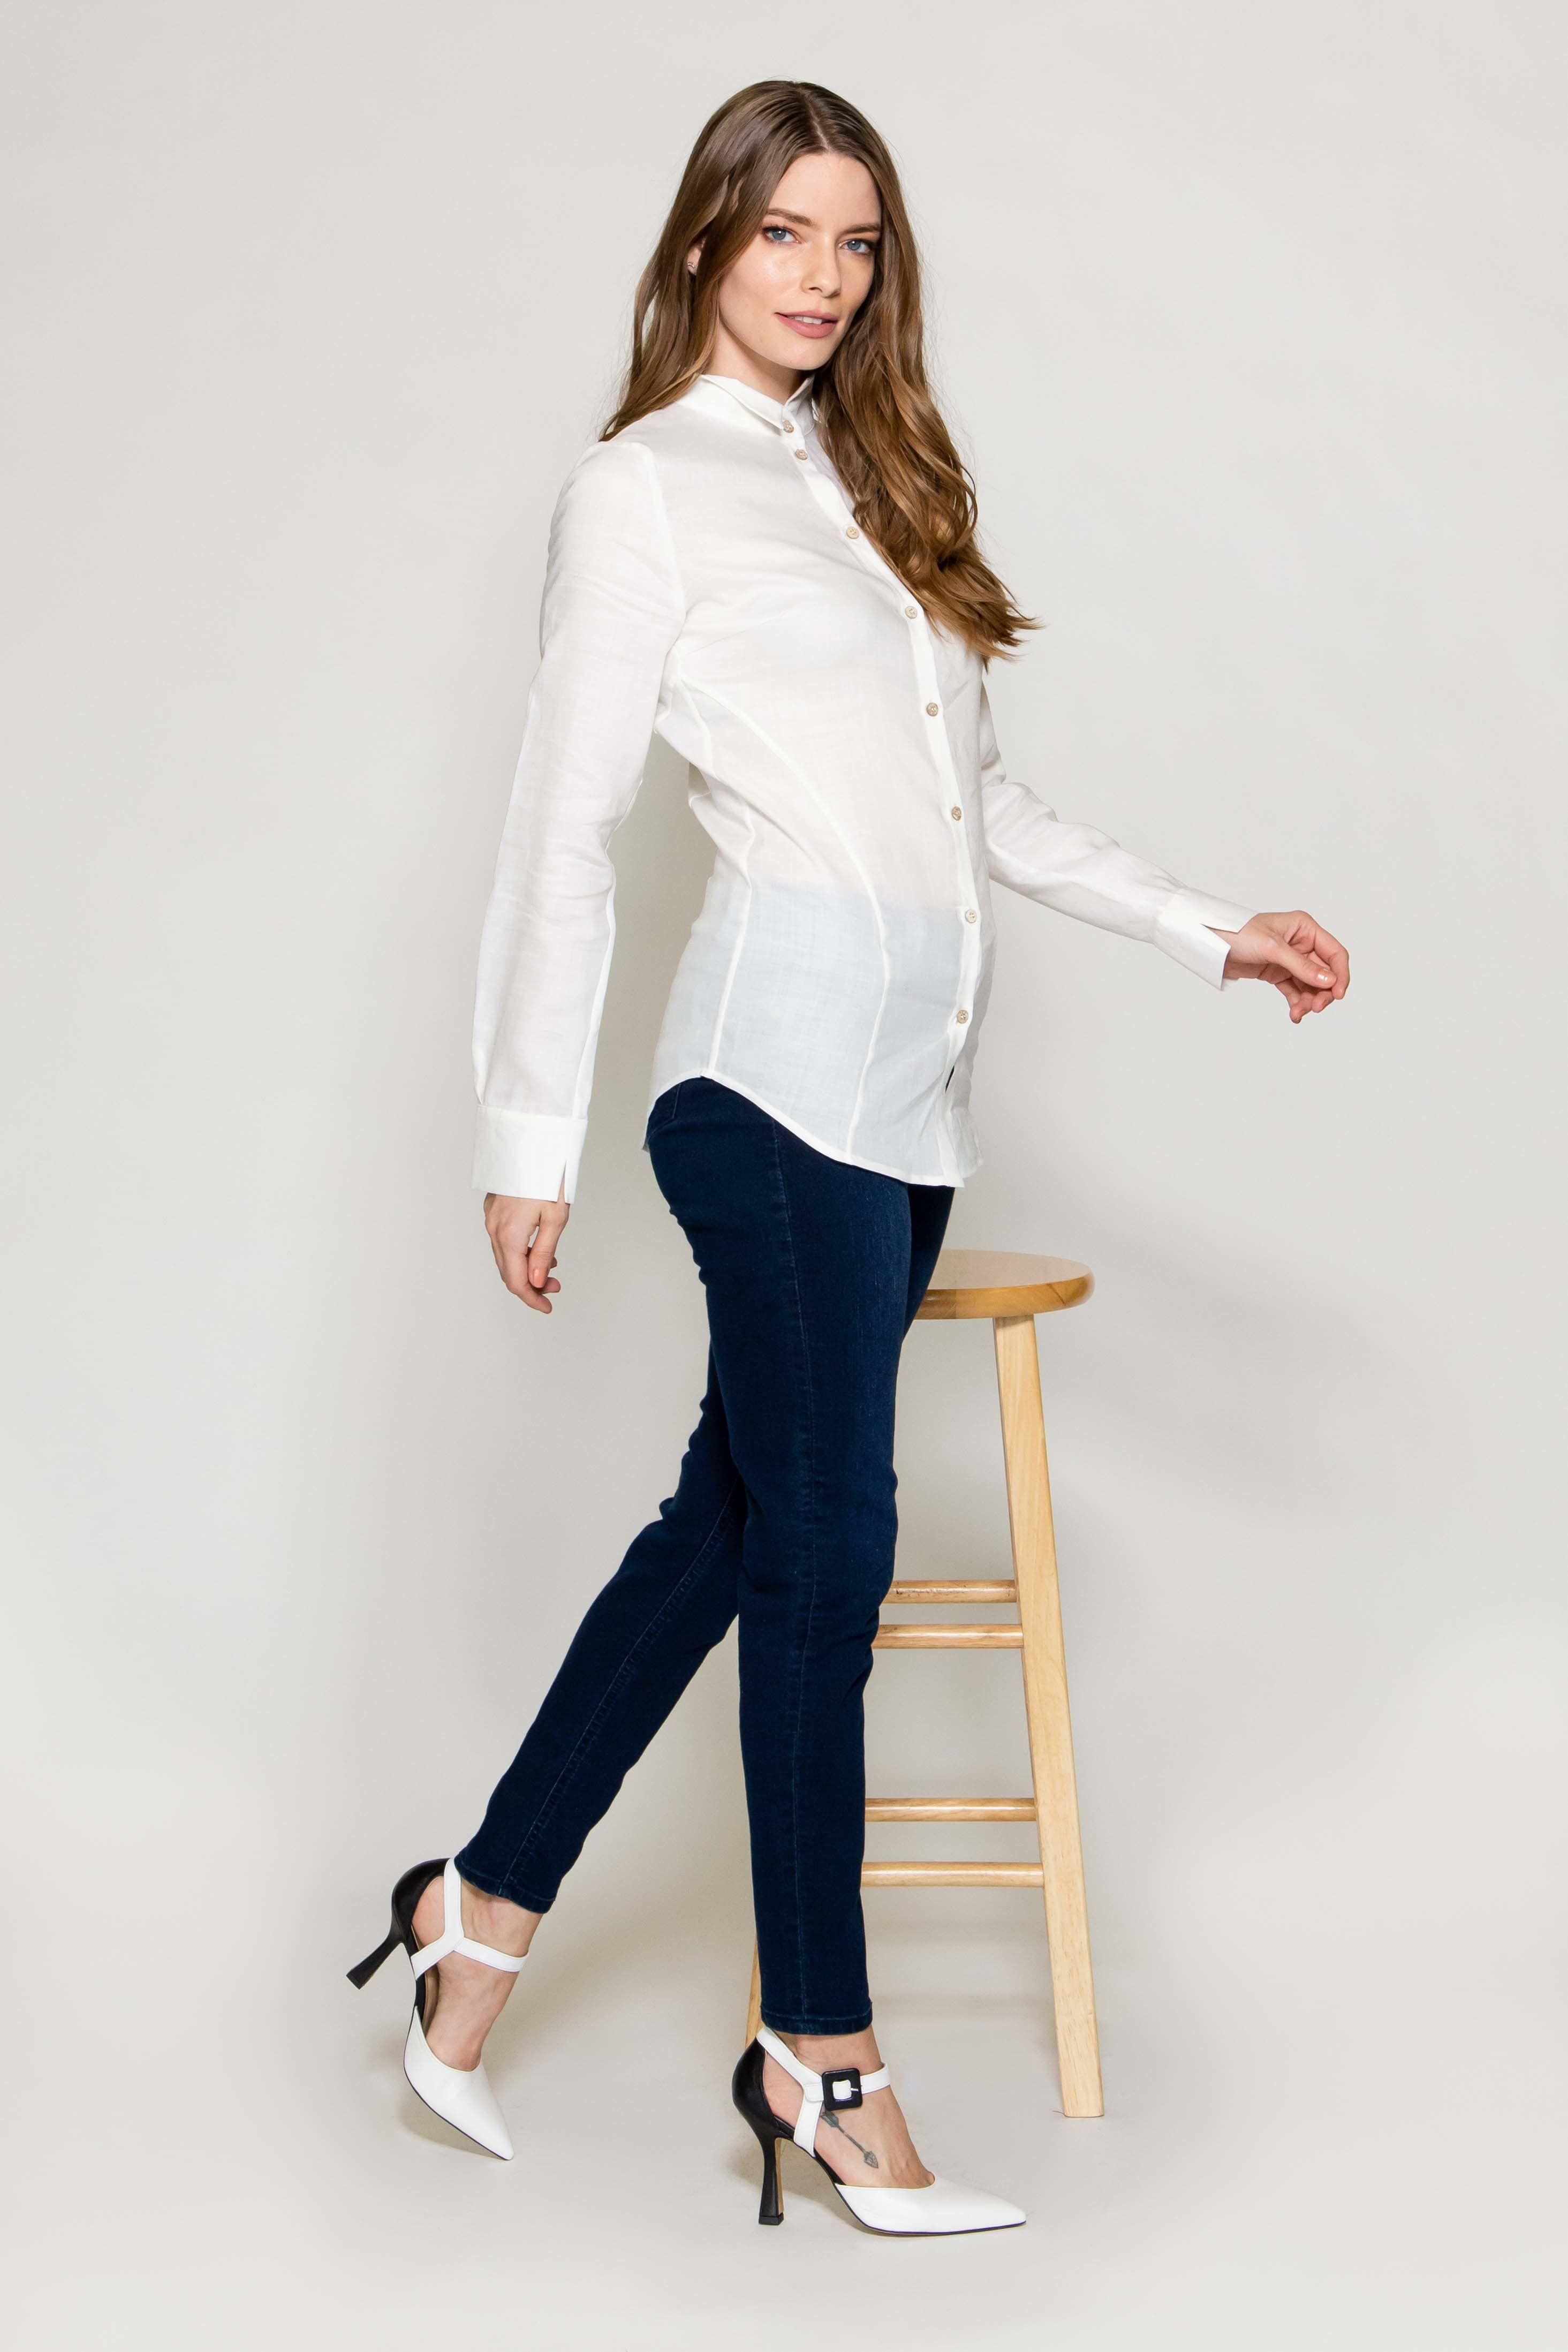 Marisé Eco . Couture TOPS Bella White Collared Button Up Long Sleeve Shirt